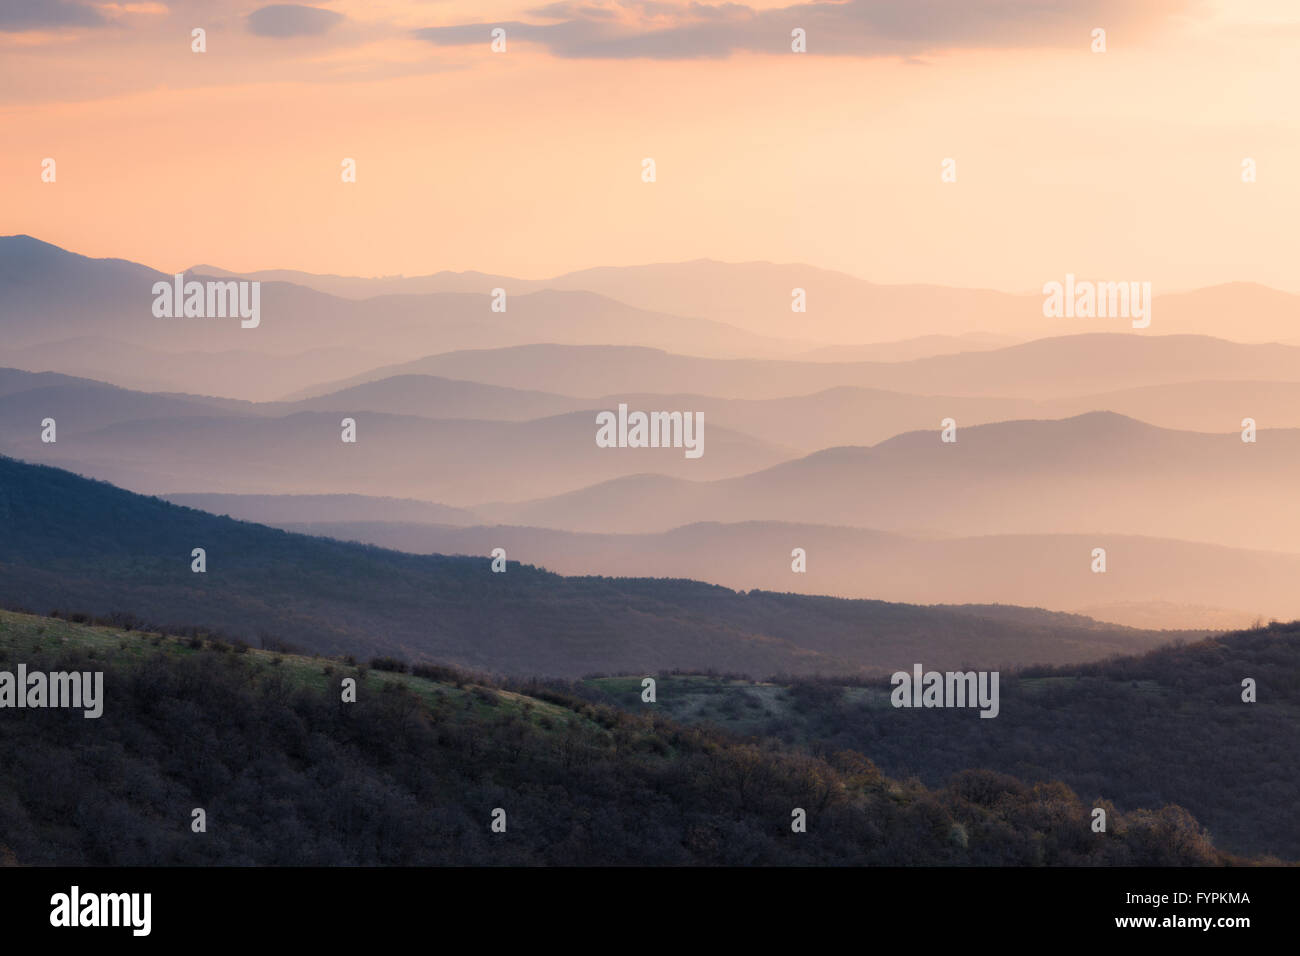 Mountains silhoutte at sunrise Stock Photo